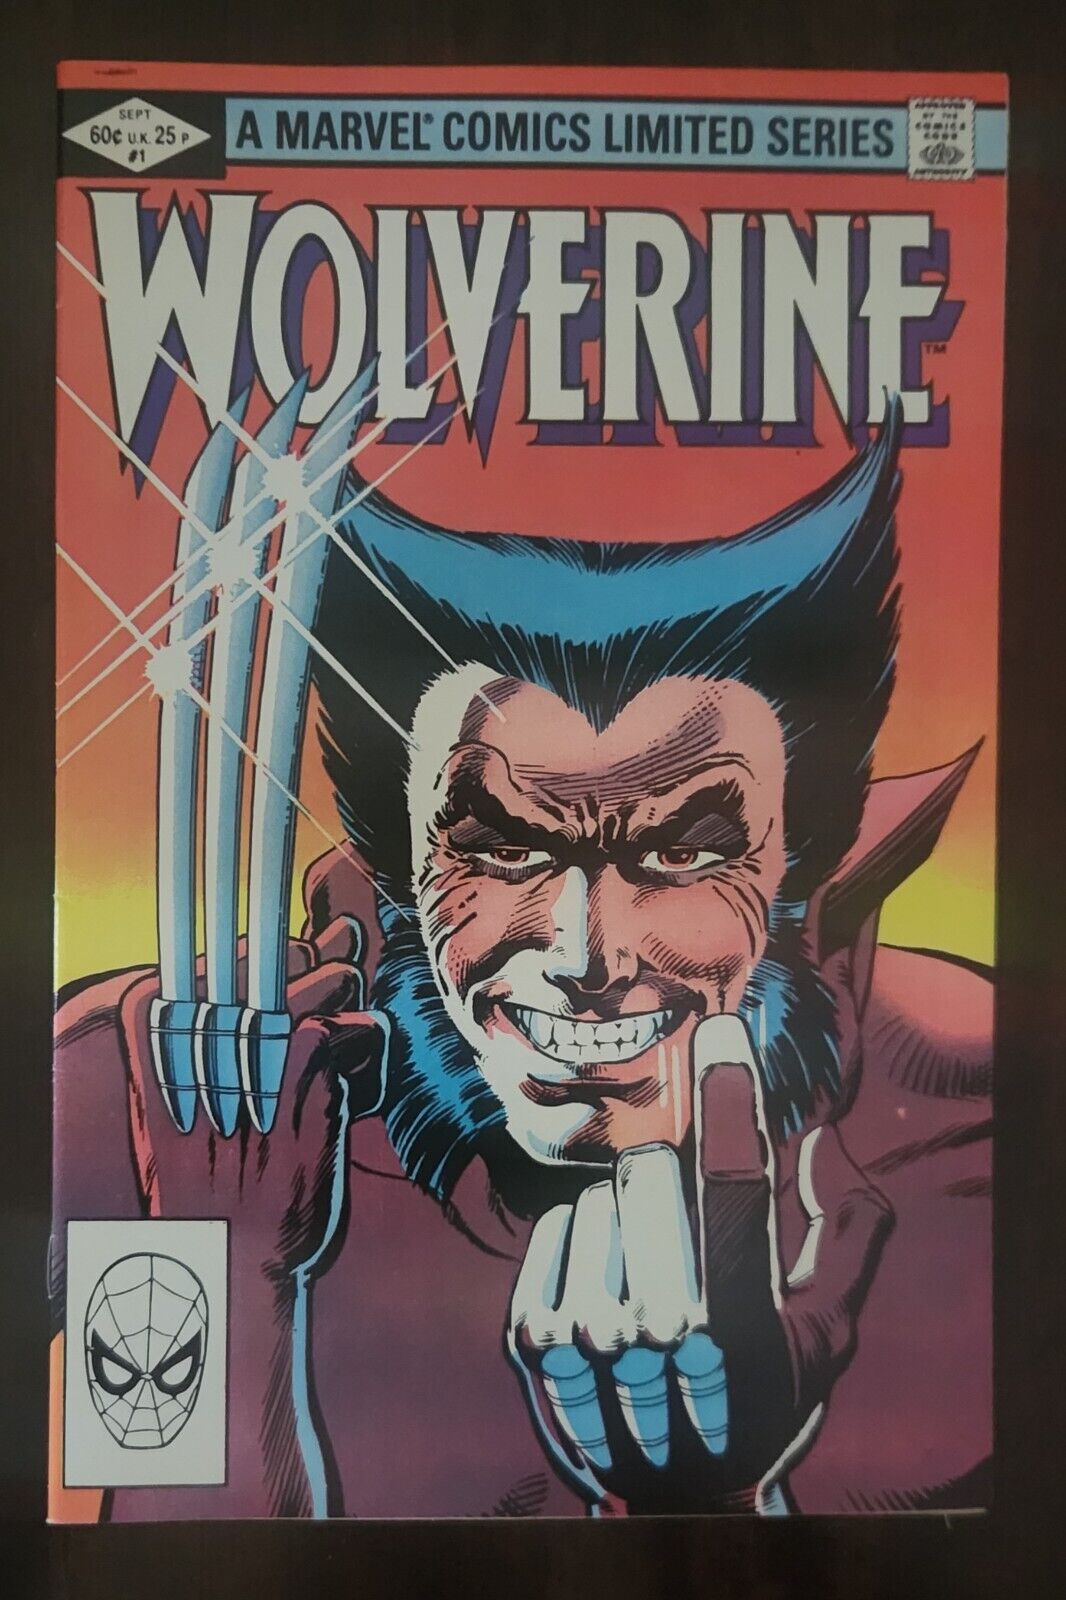 WOLVERINE #1 🔥💎 High Grade 1st Wolverine Solo Limited Series 1982 VF/NM